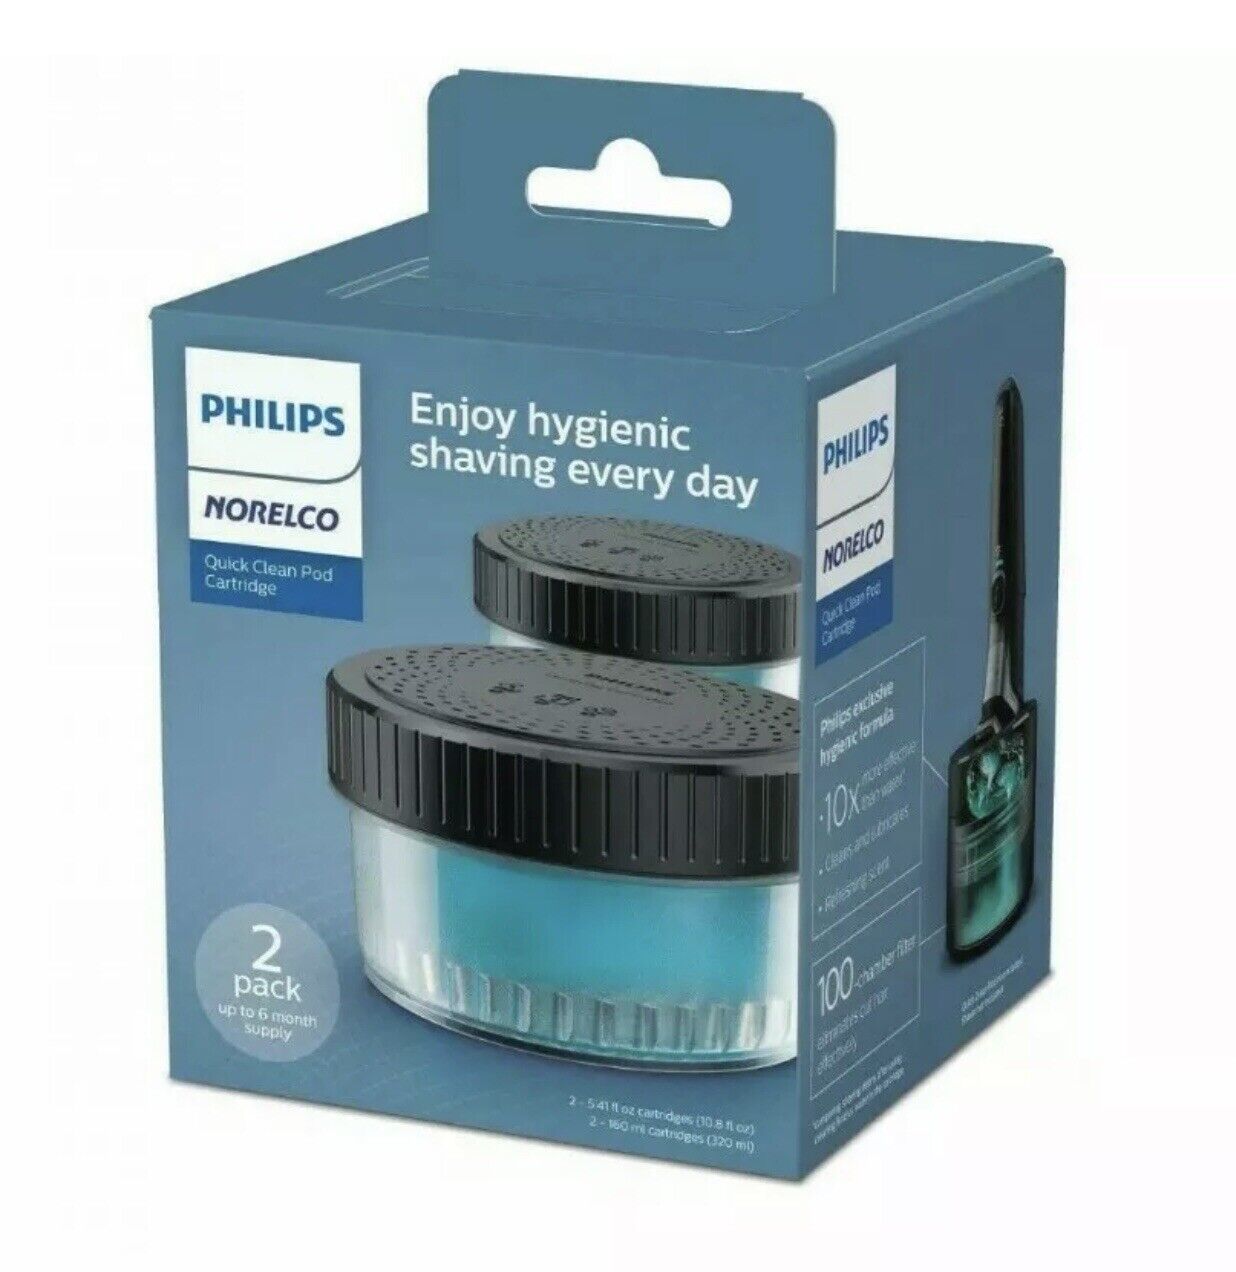 NEW Philips Norelco Quick Clean Pod Cartridge (2 pods per box) Alcohol Free - $11.00